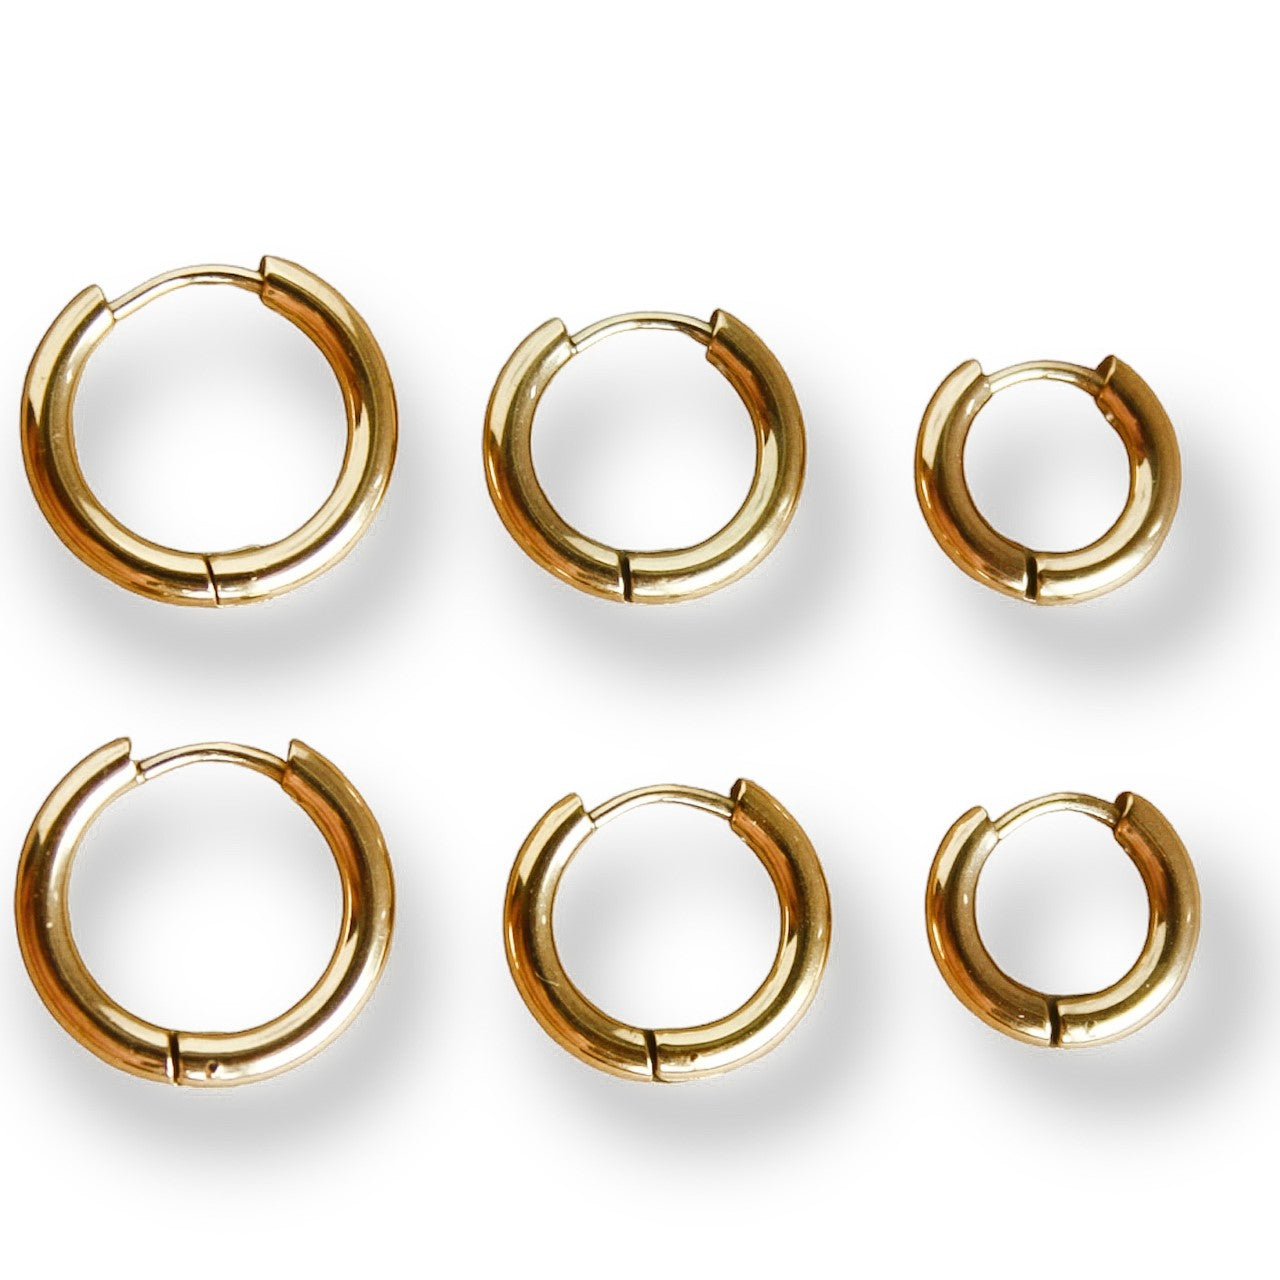 Basic small hoops